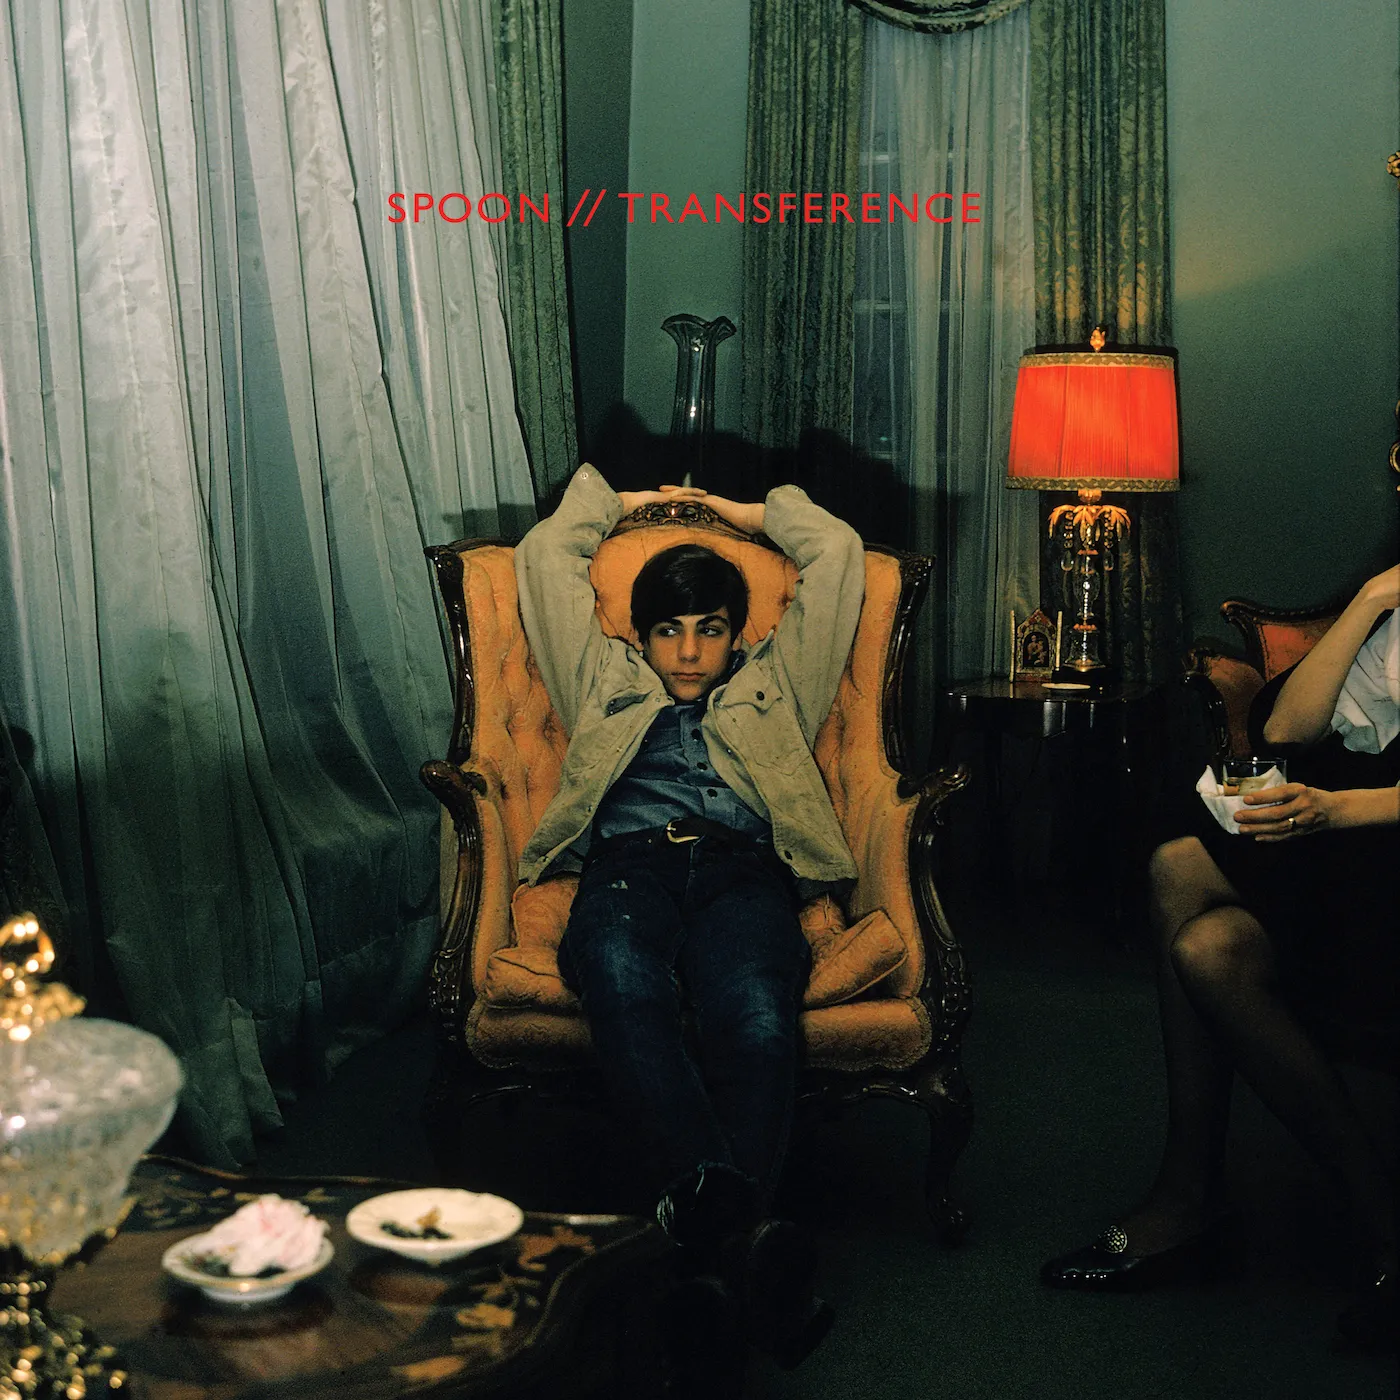 <strong>Spoon - Transference</strong> (Cd)